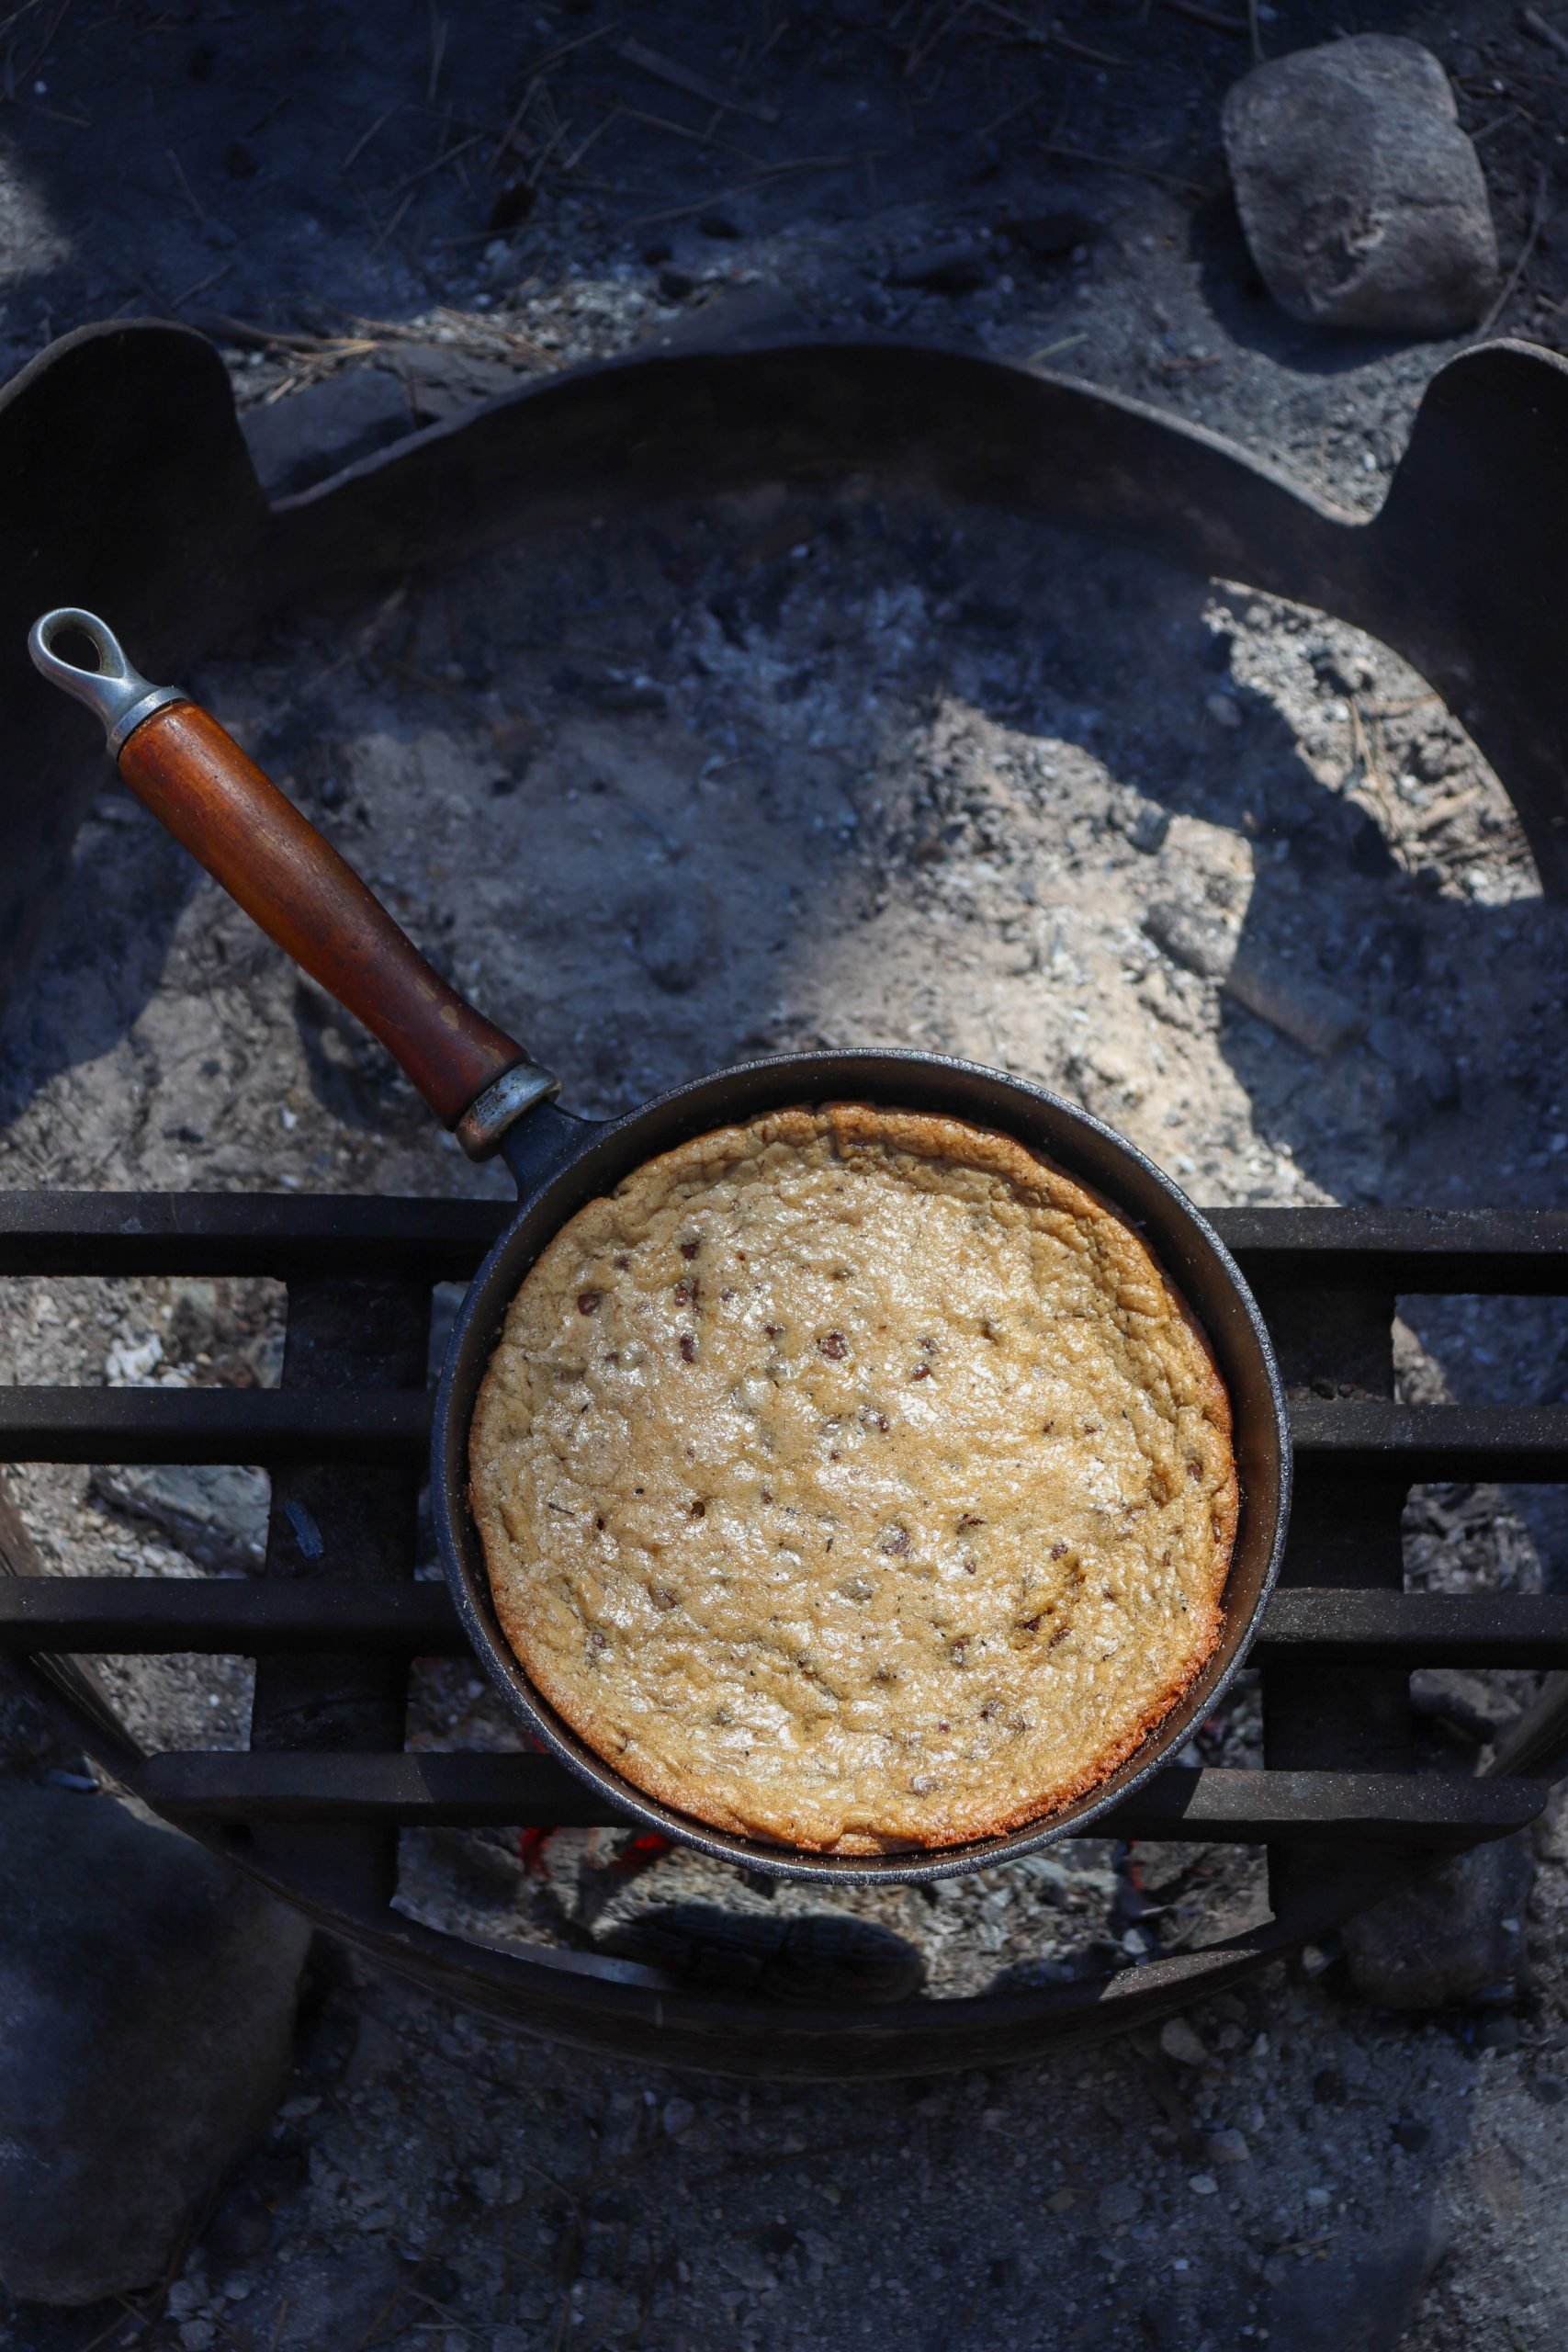 Camping Chocolate Chip Skillet Cookie - Camping Food Recipes